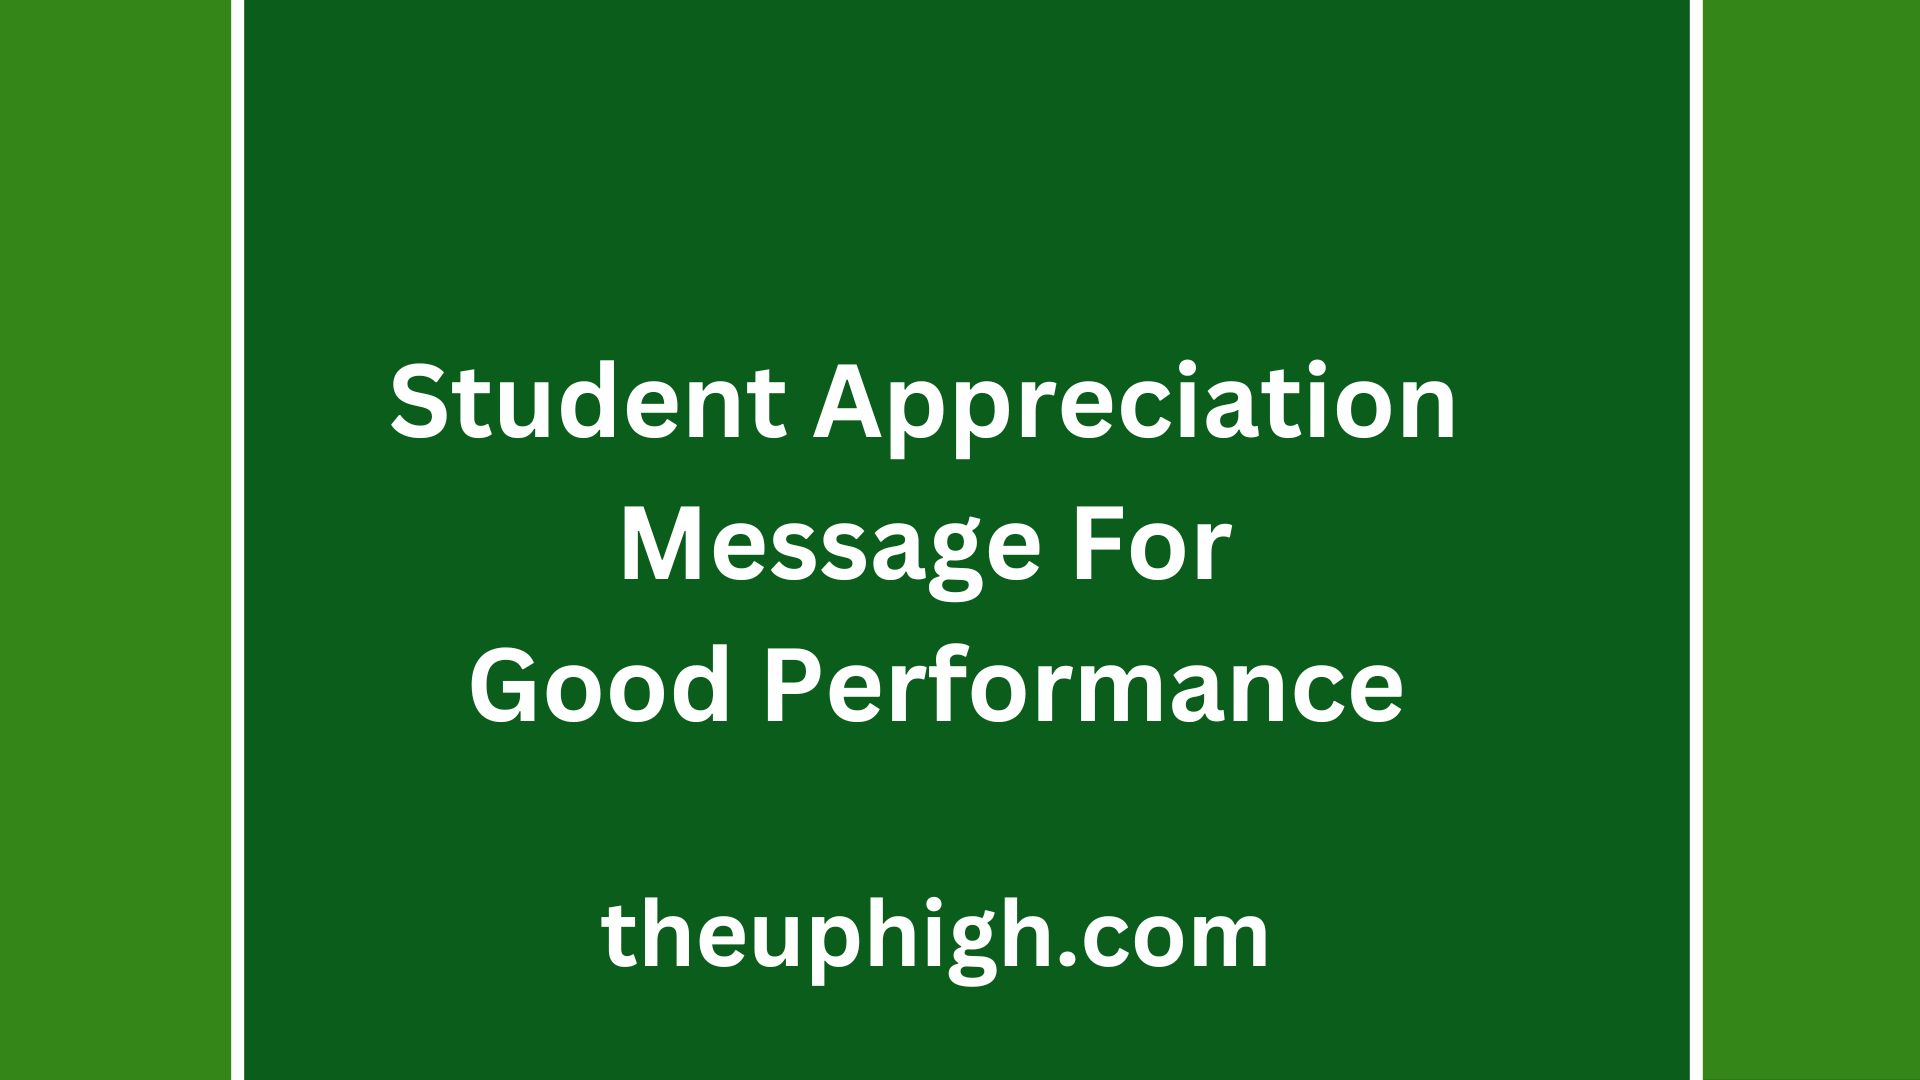 Student Appreciation Message For Good Performance